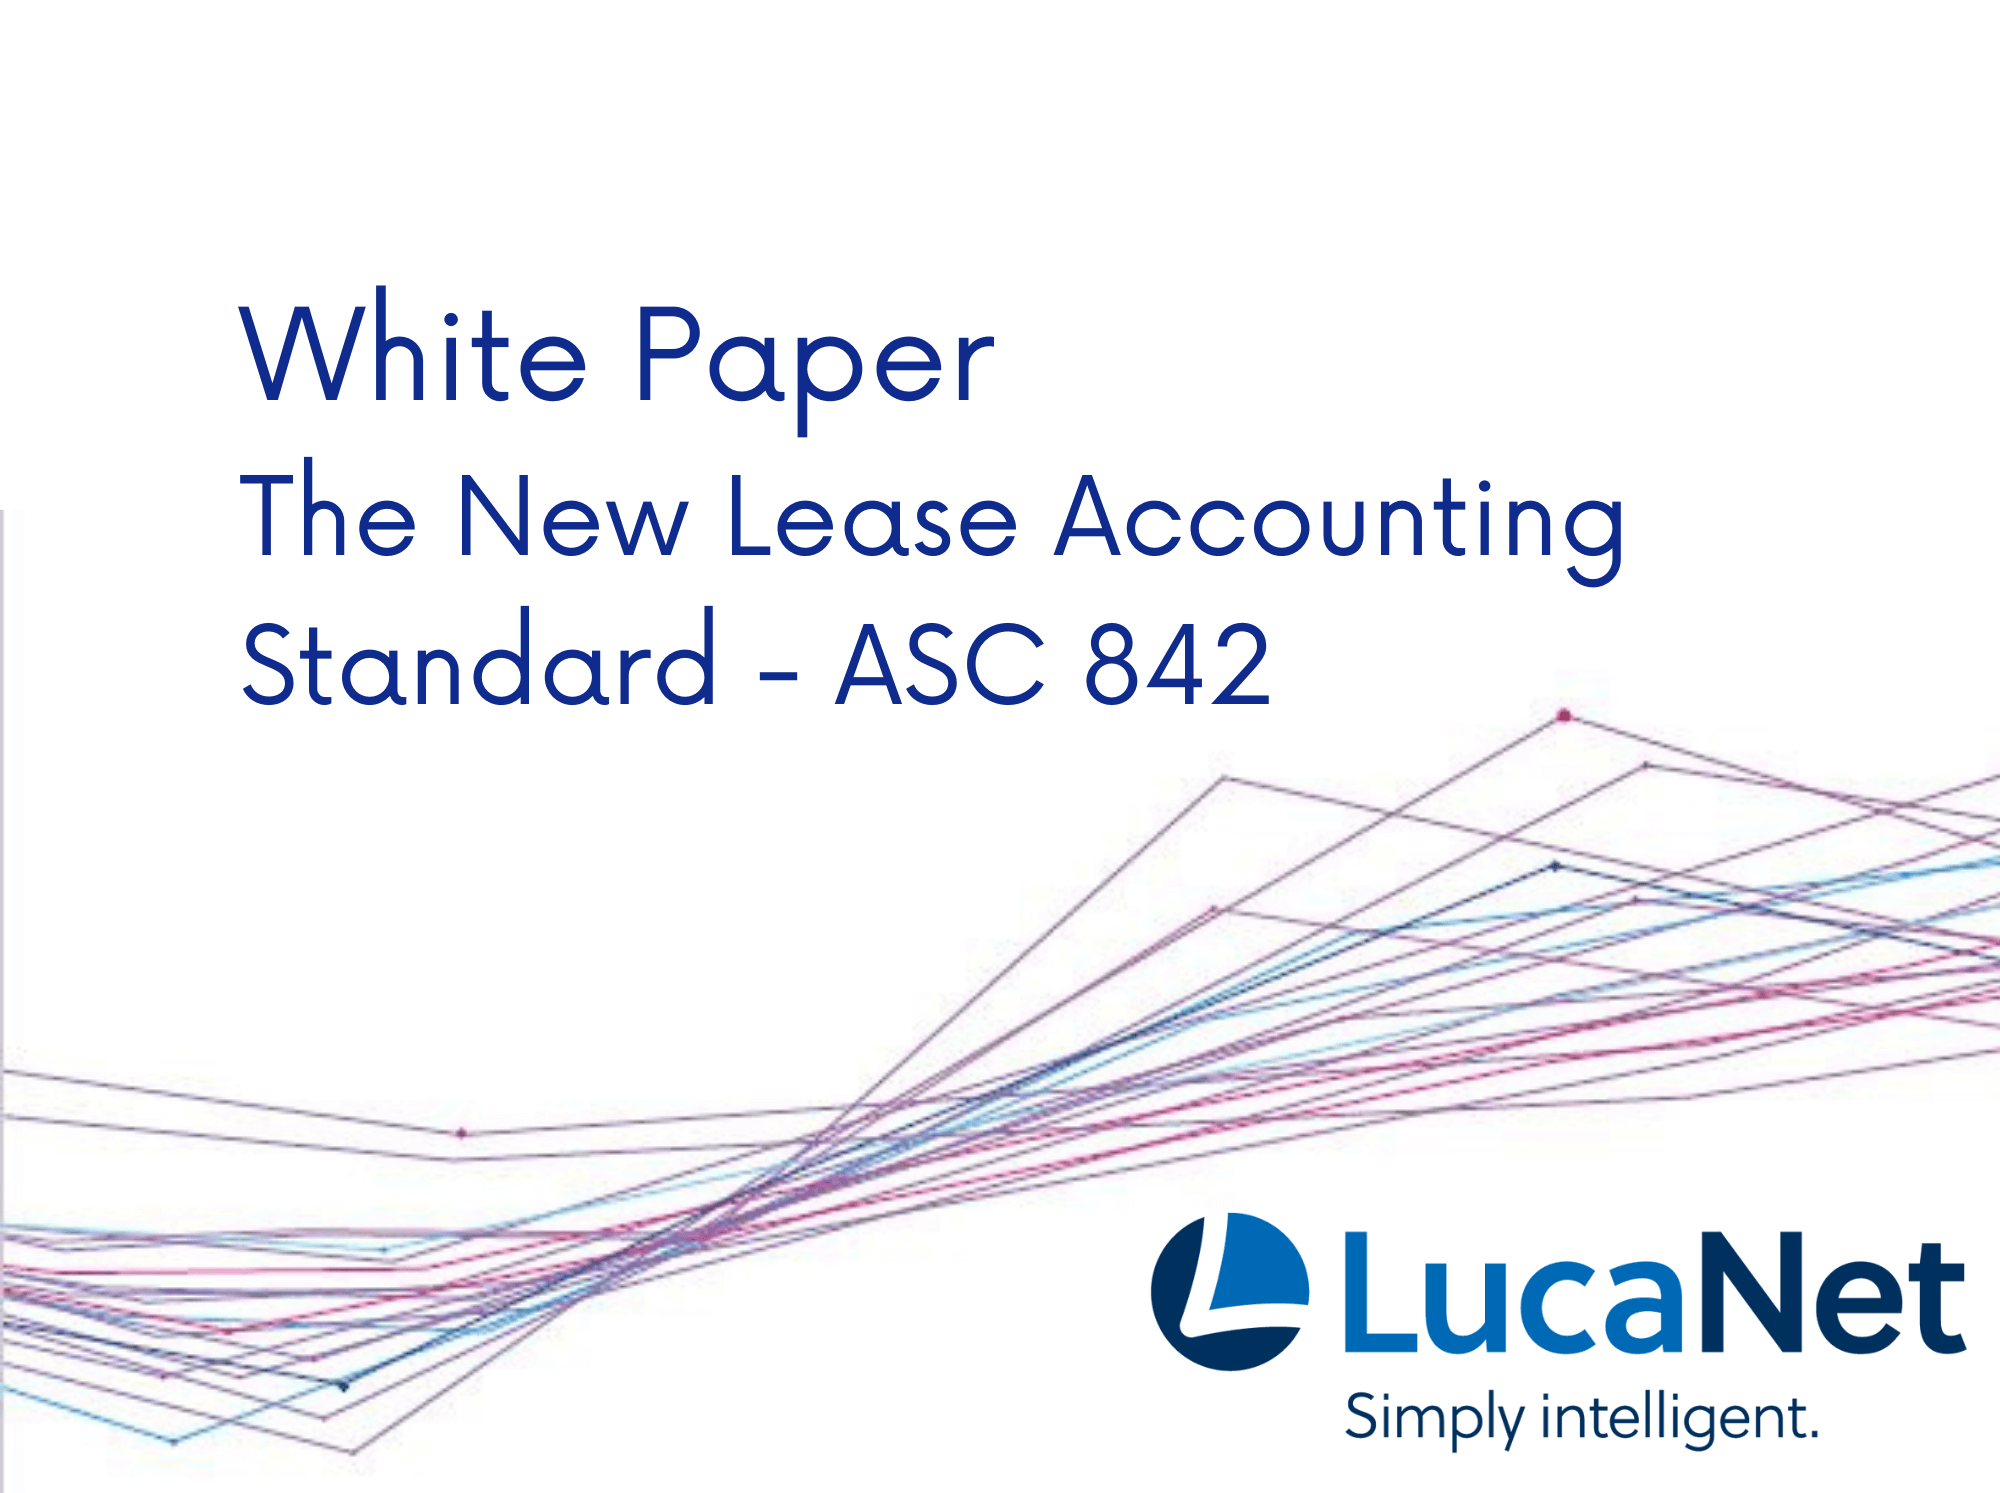 LucaNet WhitePaper: The New Lease Accounting Standard – ASC 842